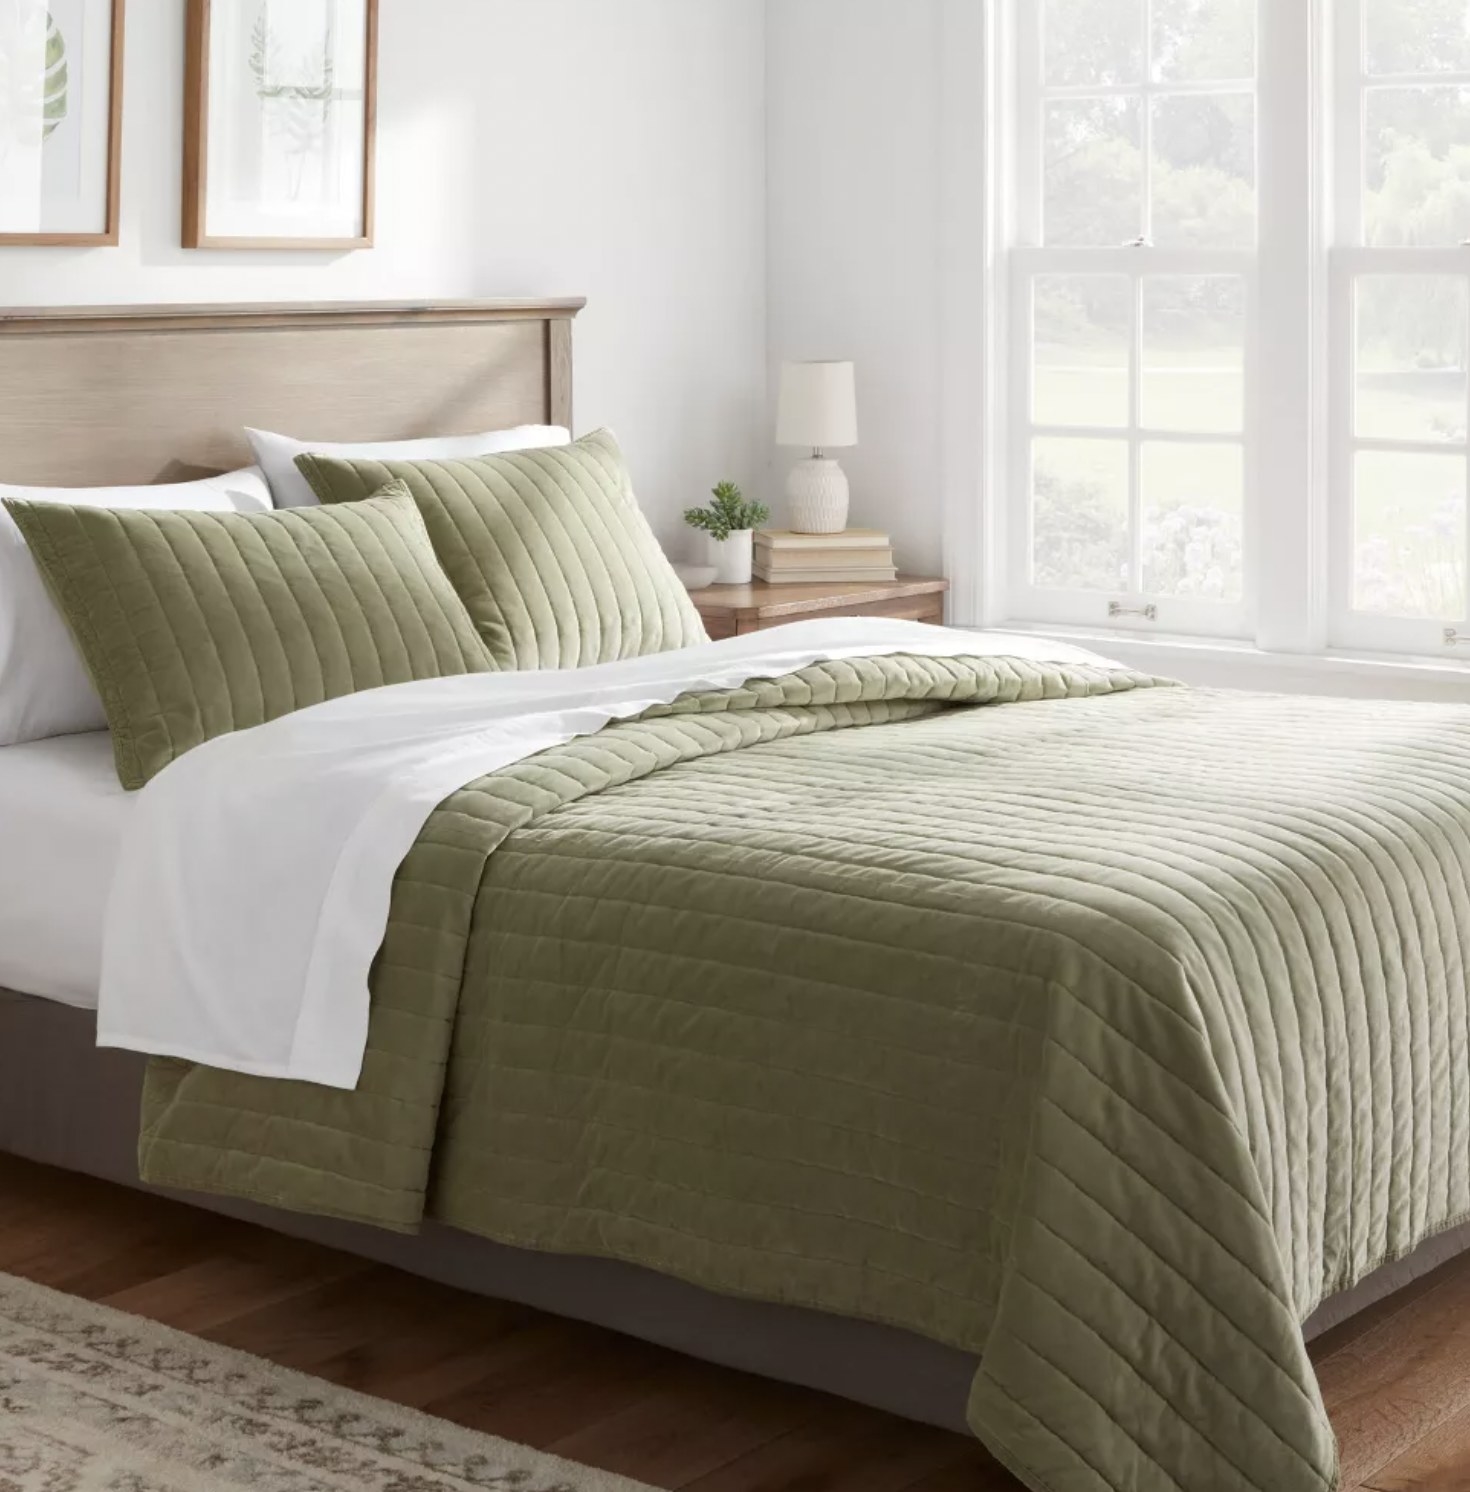 The green quilt on bed